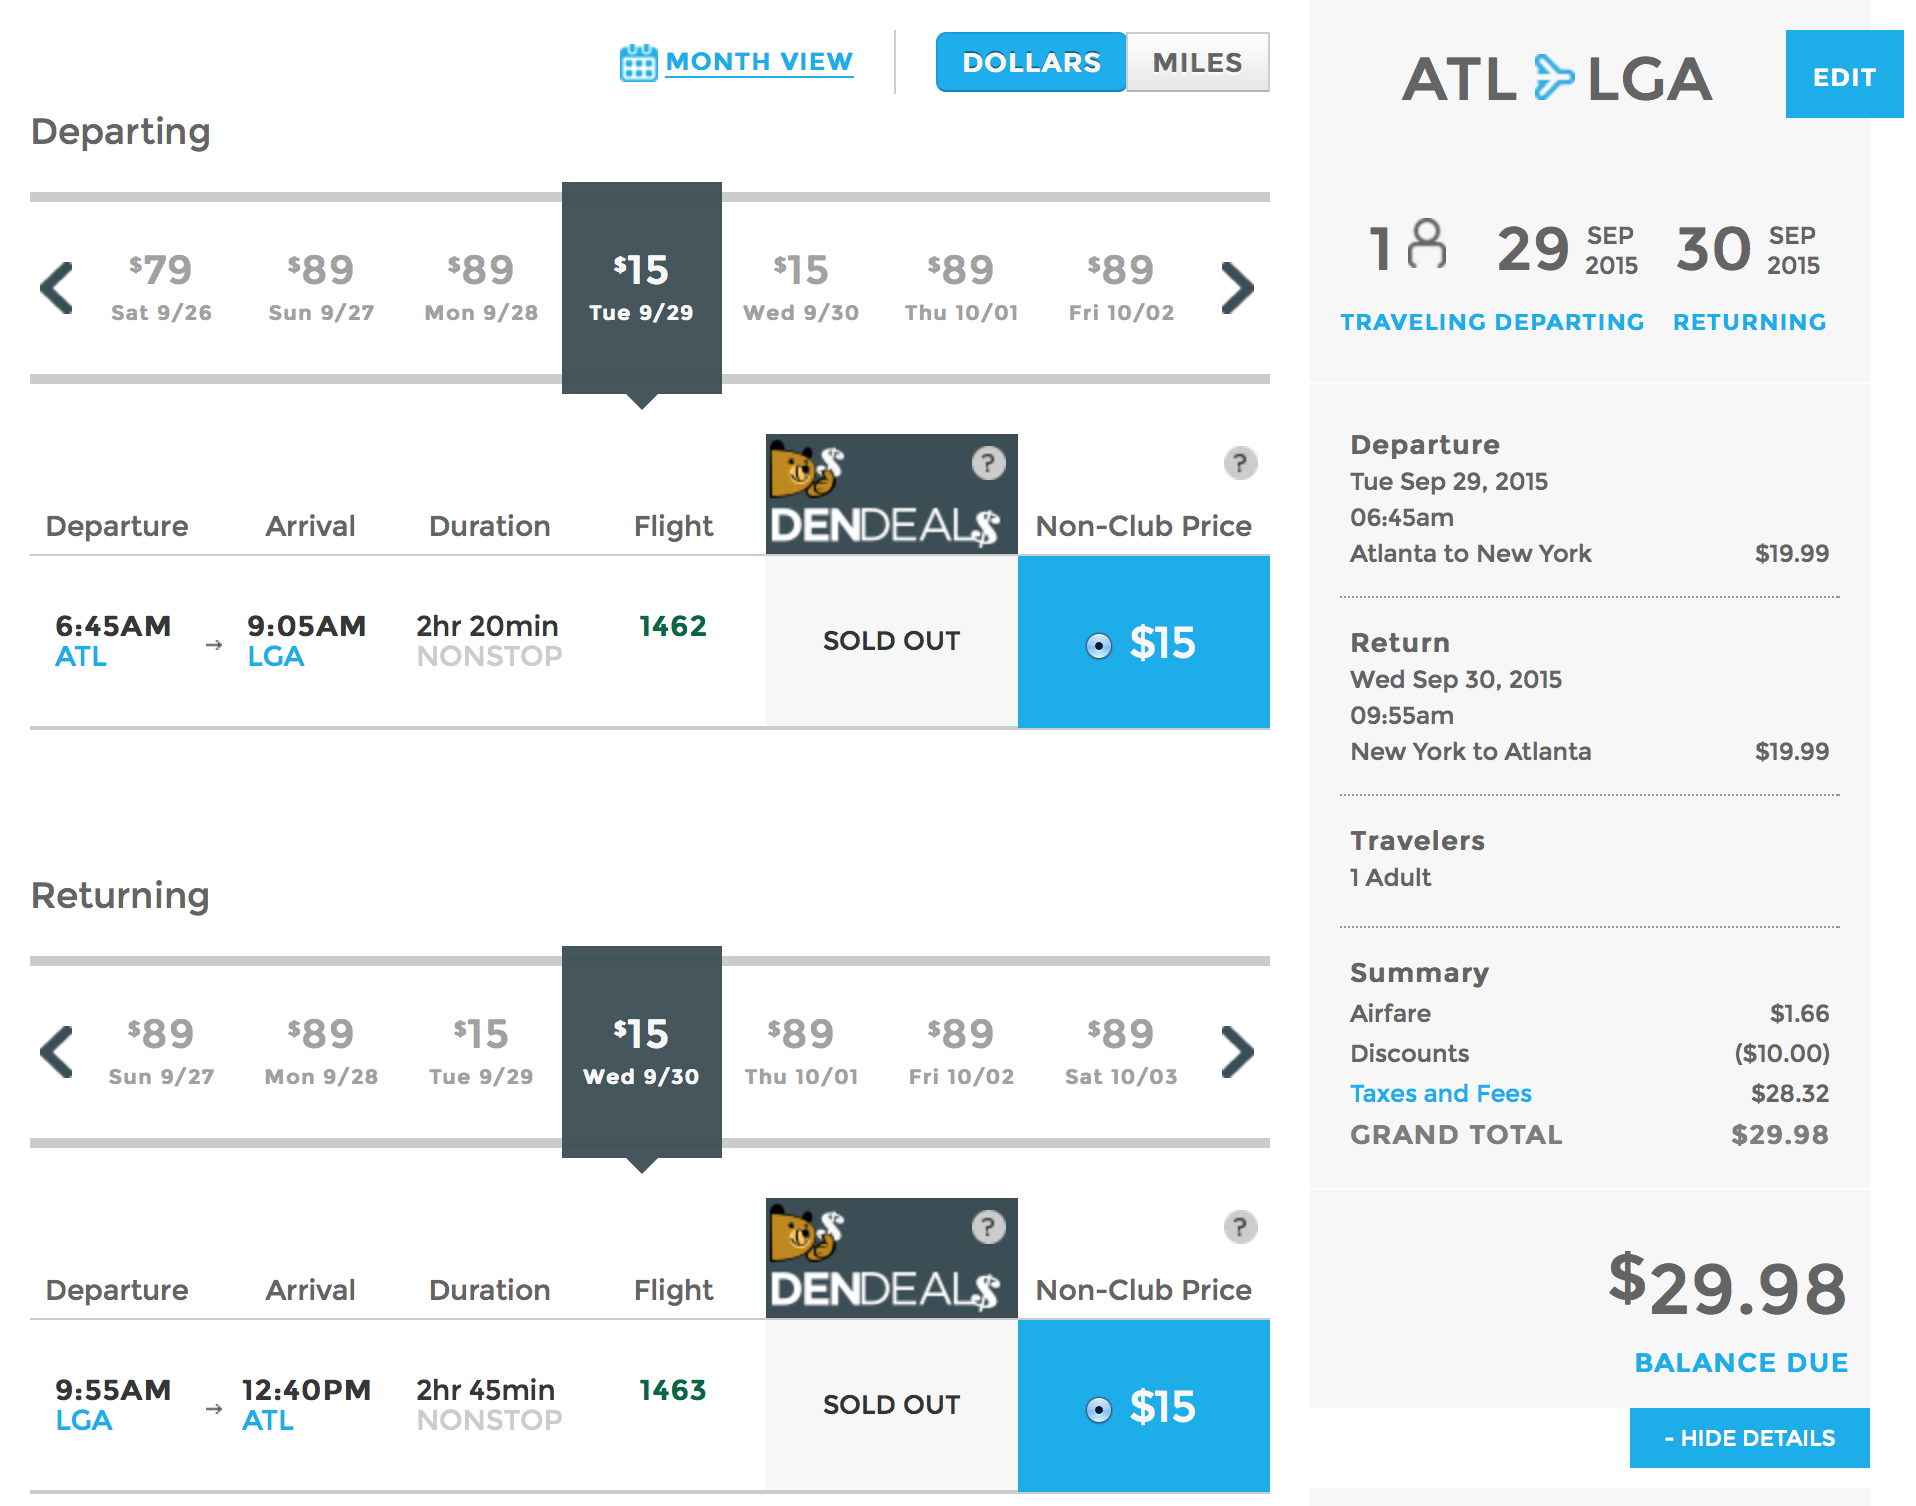 This is a screen shot of a sample round-trip itinerary between Atlanta and New York in late September.